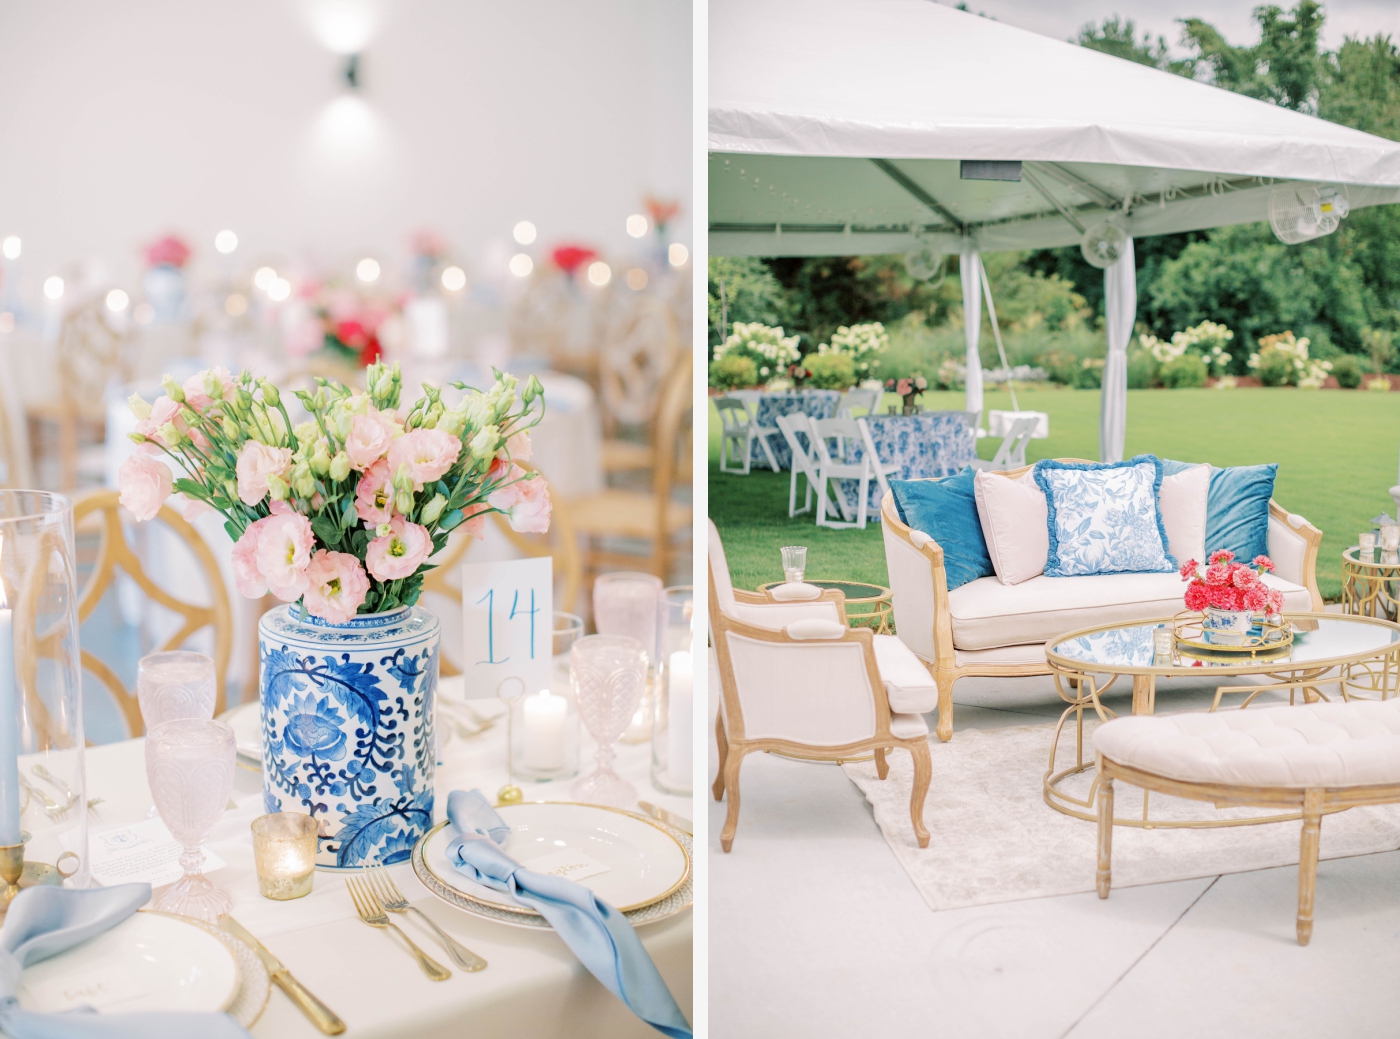 Ginger jar inspired wedding with blues and whites at The Maxwell in Raleigh